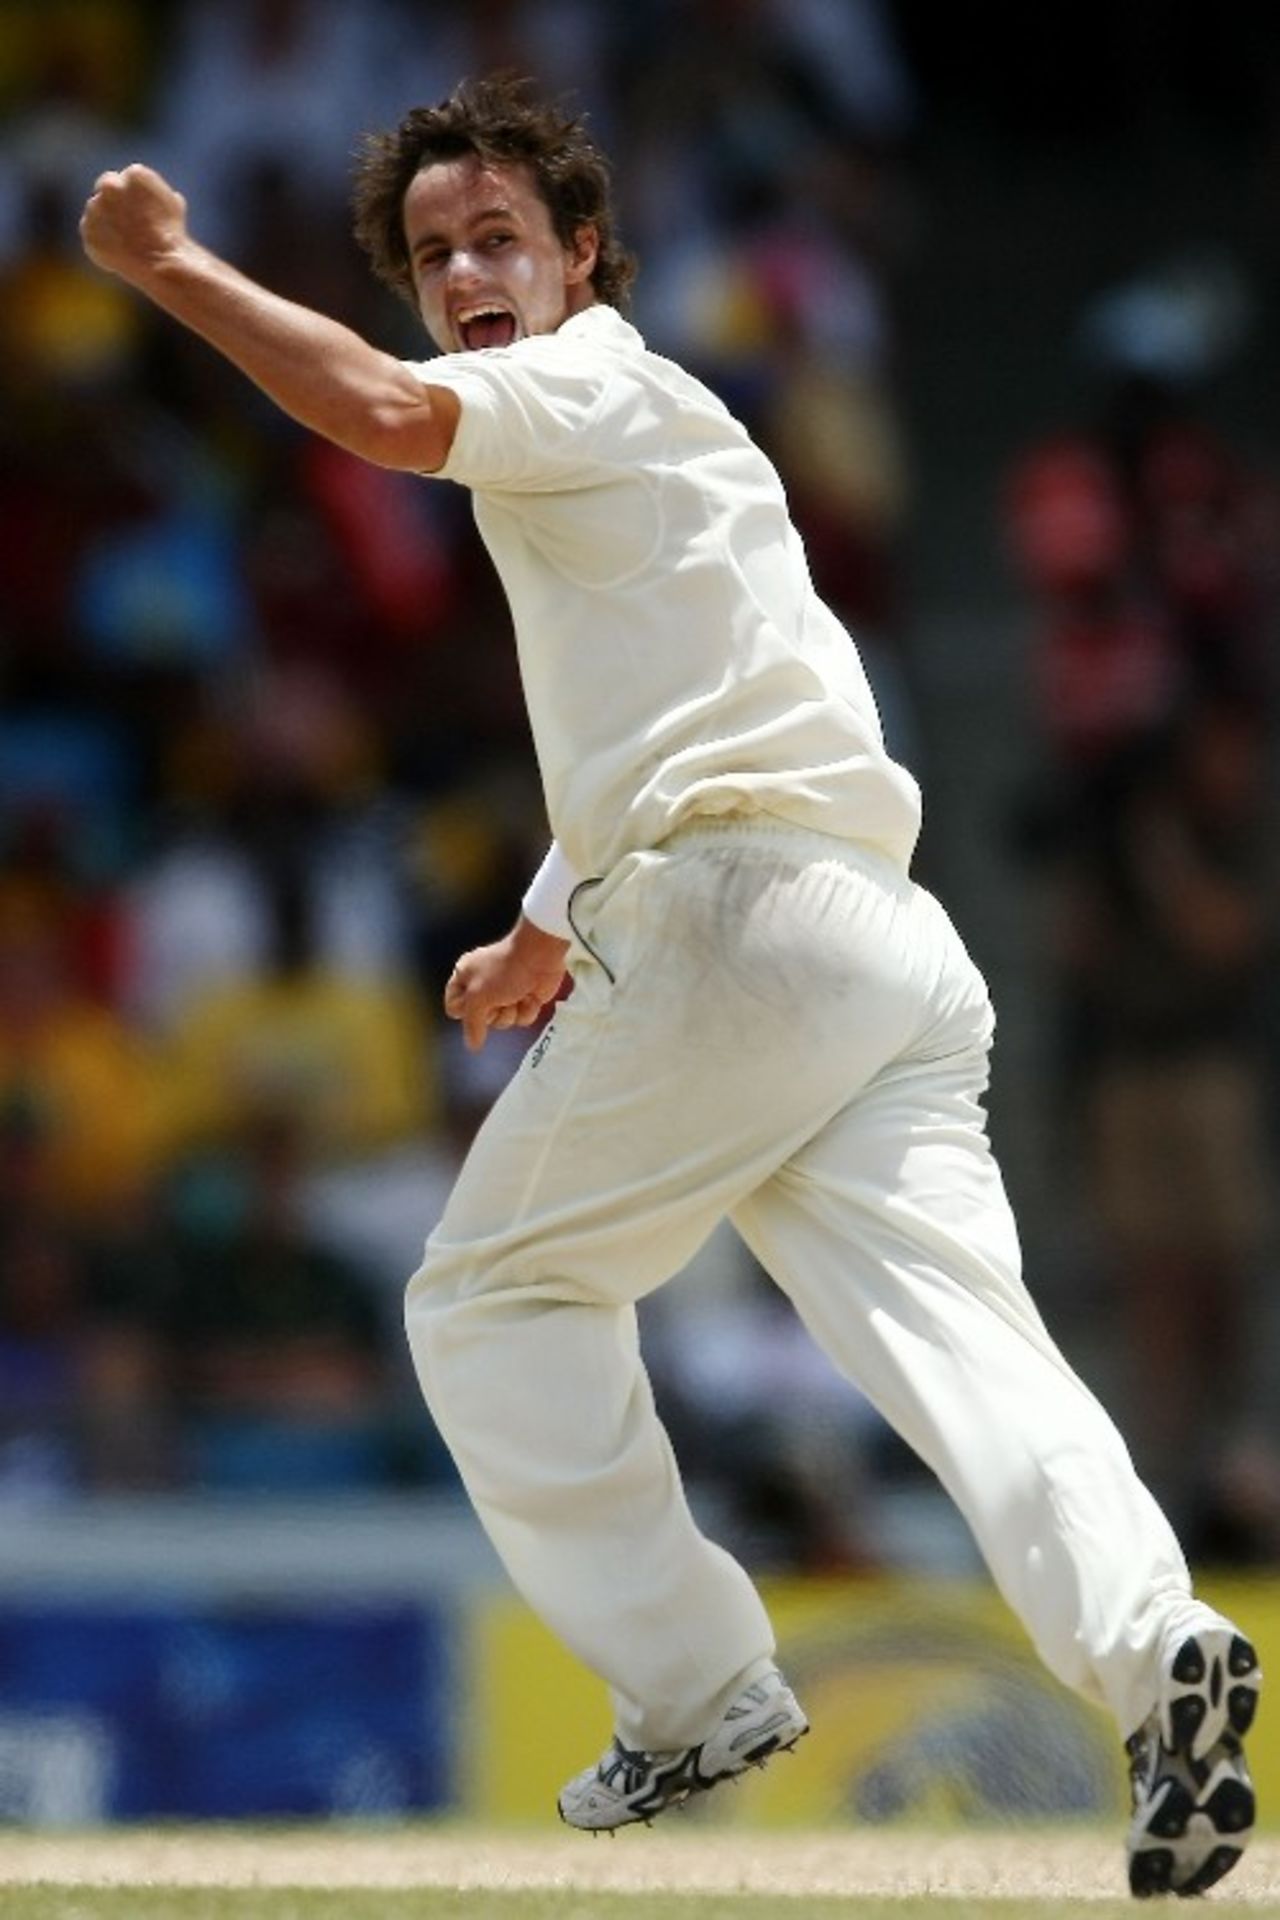 Beau Casson celebrates the wicket of Dwayne Bravo, West Indies v Australia, 3rd Test, Barbados, 5th day, June 16, 2008